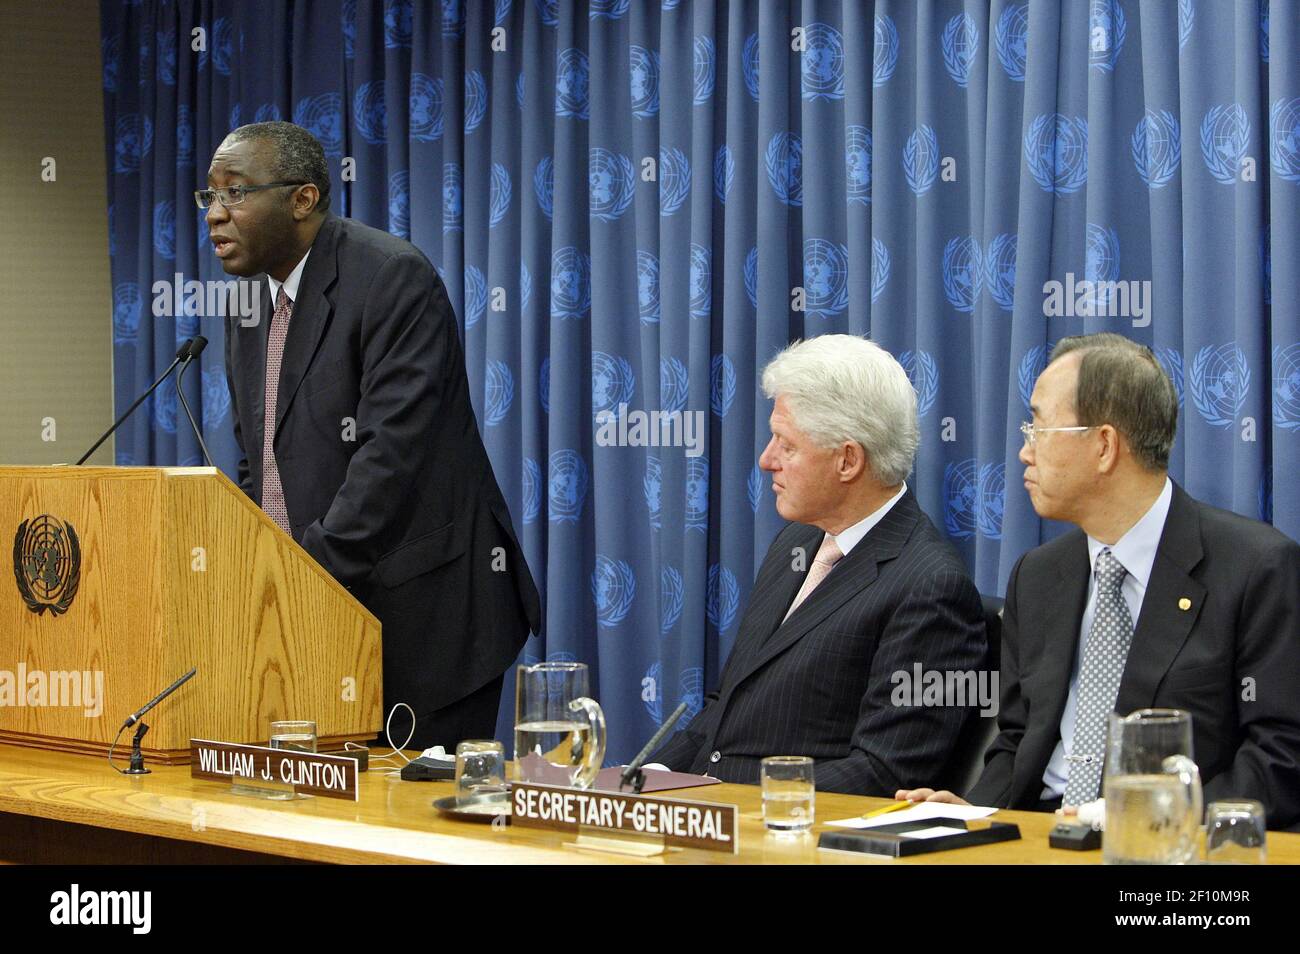 15 June 2009 - New York, NY - Alrich Nicolas, Minister for Foreign Affairs of Haiti, addresses a press conference, as Secretary-General Ban Ki-moon (right) and William Jefferson Clinton, United Nations Special Envoy for Haiti and former President of the United States of America, listen. Photo Credit: Mark Garten / UN Photo/Sipa Press/0906171554 Stock Photo